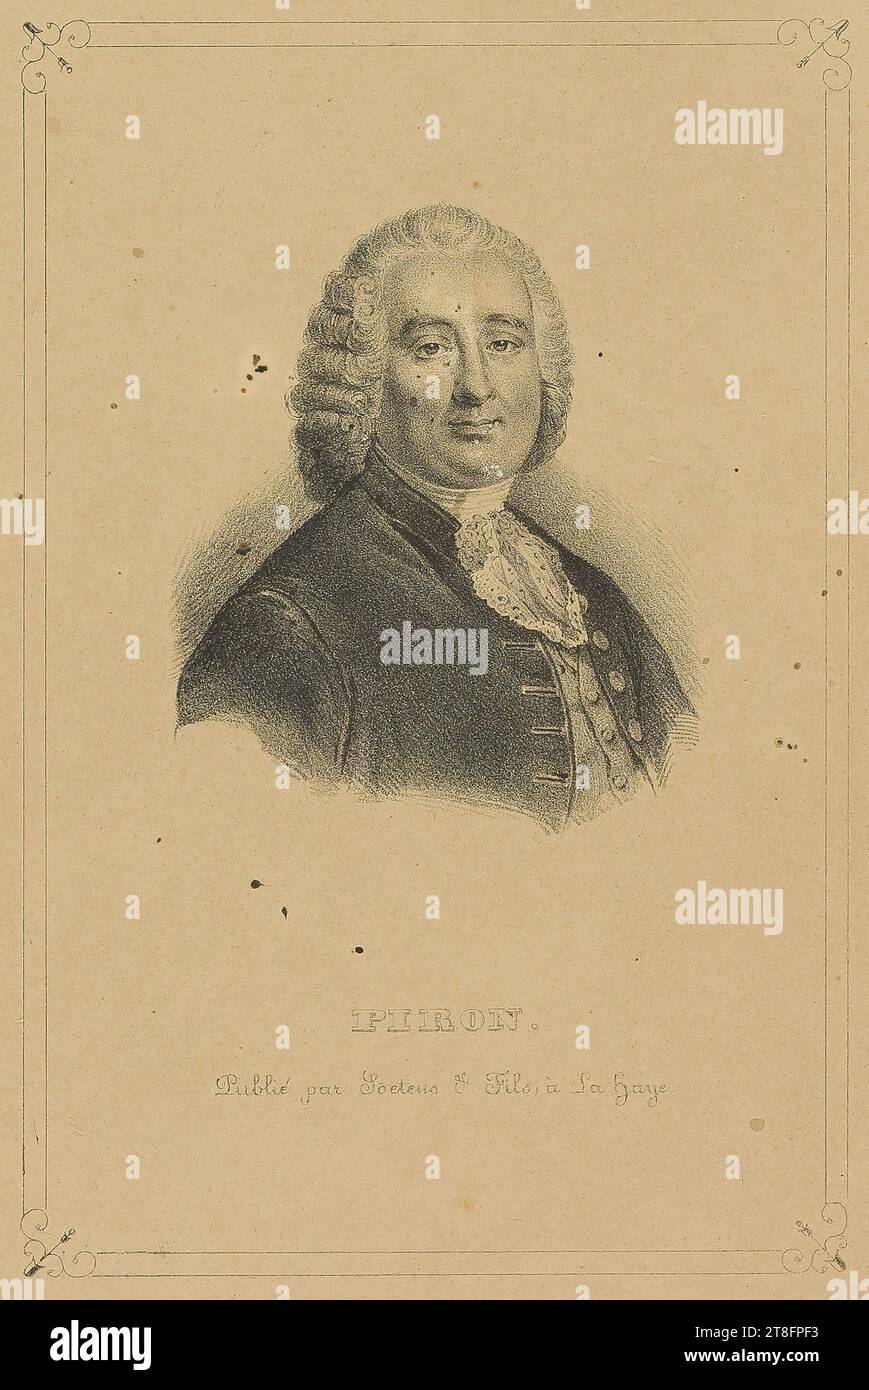 PIRON. Published by Soetens & Sons, The Hague. illustration from: Portraits of well-known persons from the history of discovery Stock Photo